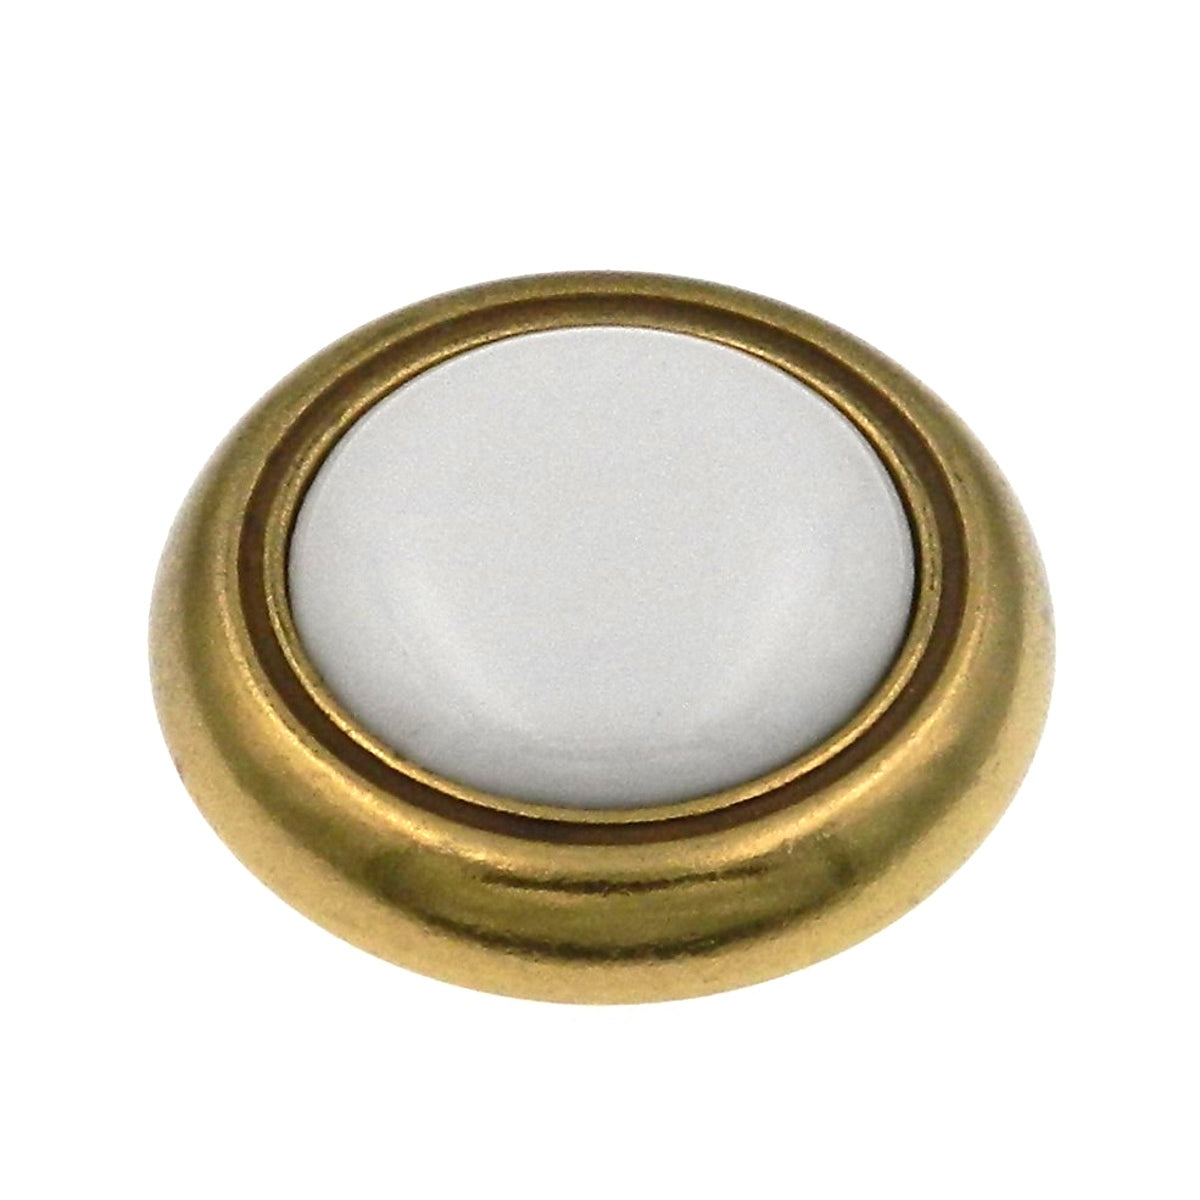 10 Pack Hickory P709-W Lancaster Brass 1 3/16" Cabinet Knobs with White Center